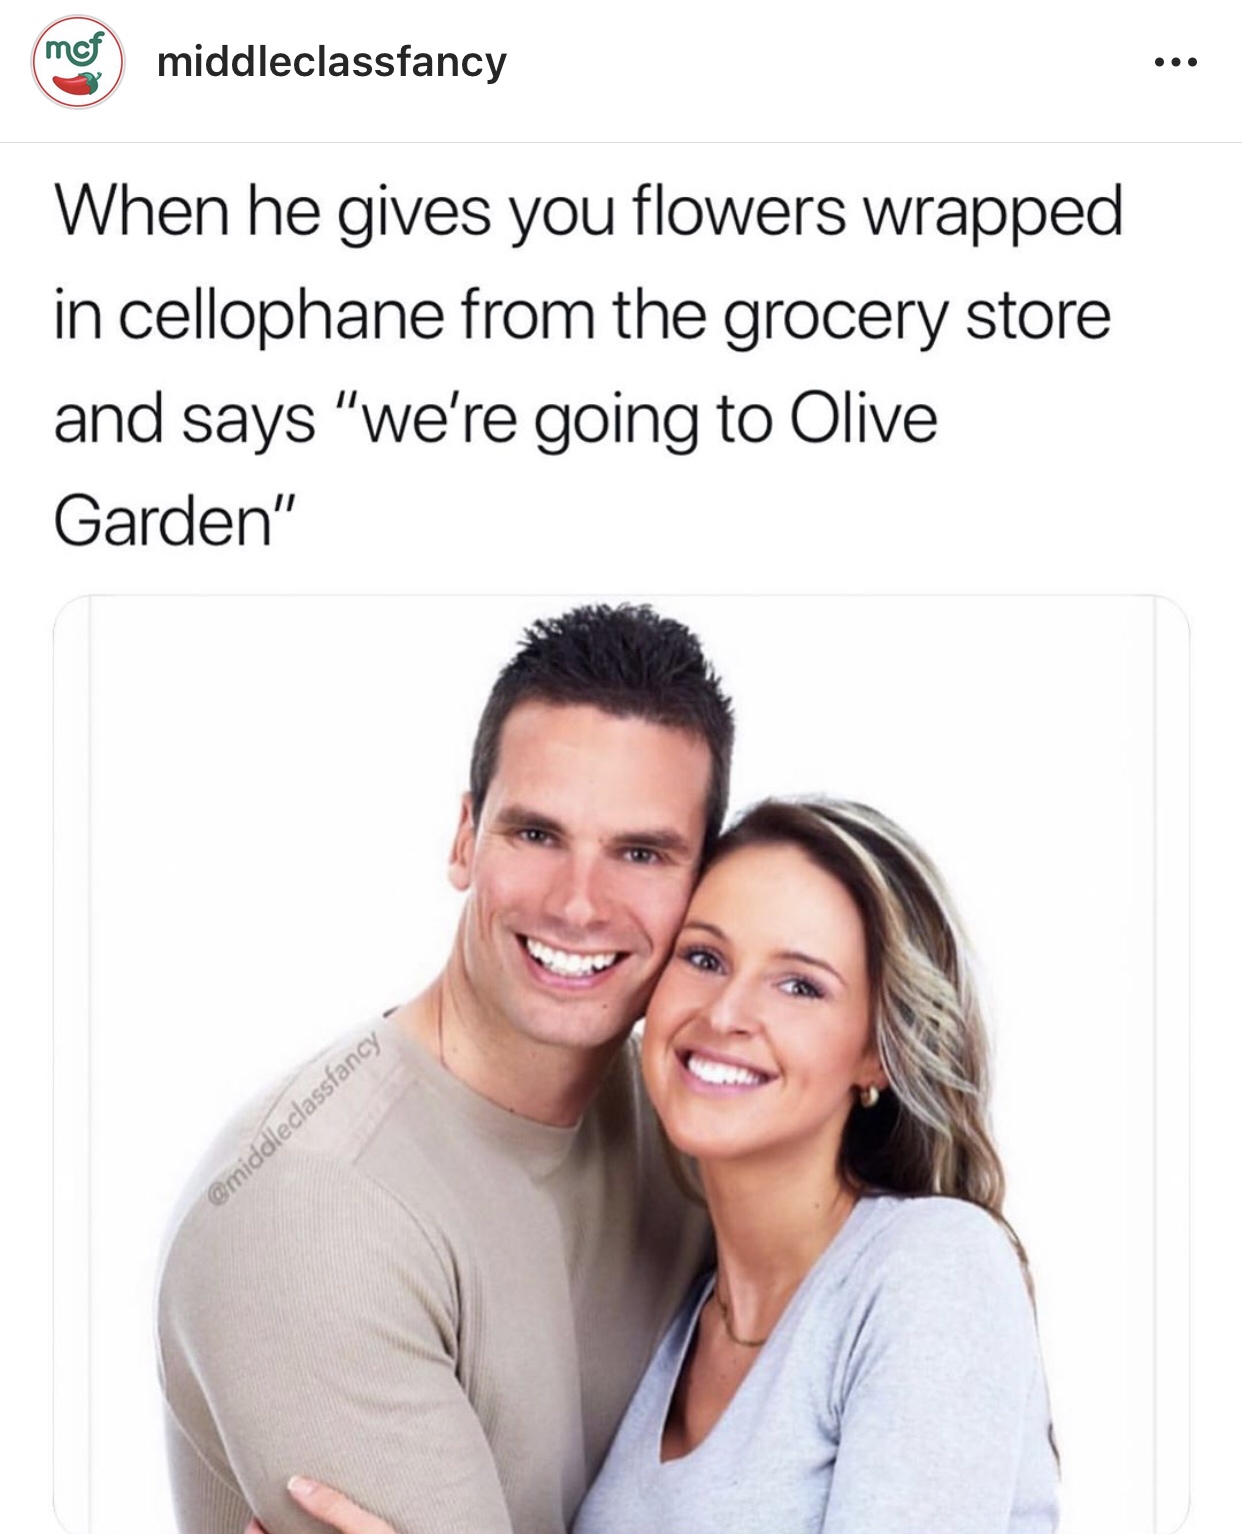 middle class fancy olive garden - mos middleclassfancy When he gives you flowers wrapped in cellophane from the grocery store and says "we're going to Olive Garden"